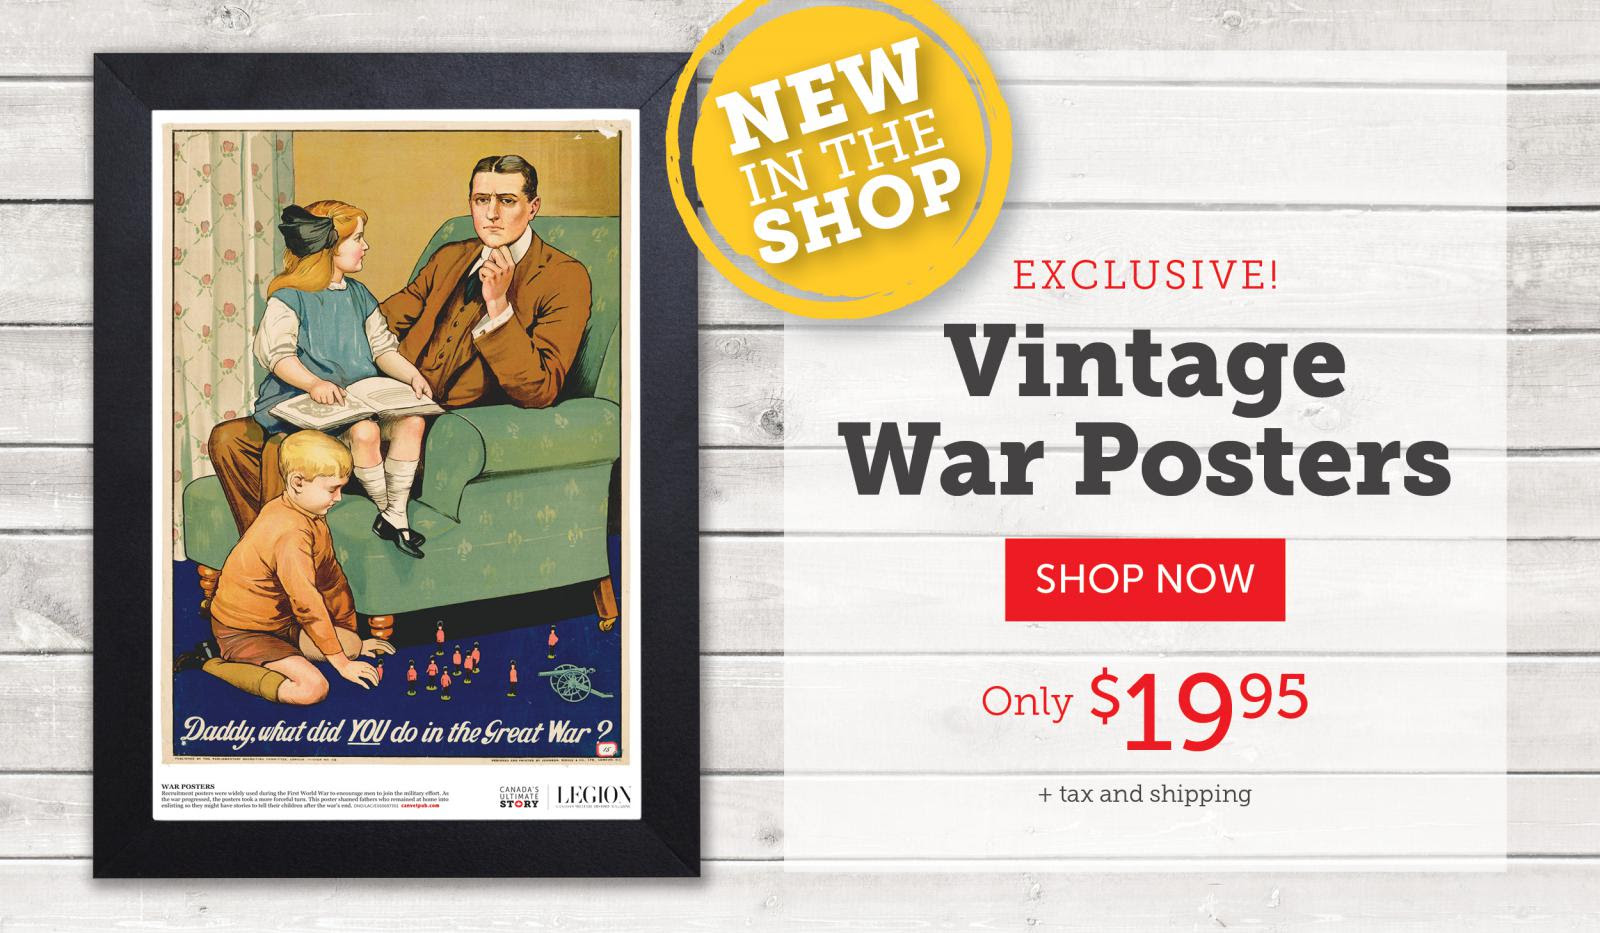 Vintage War Posters now available!